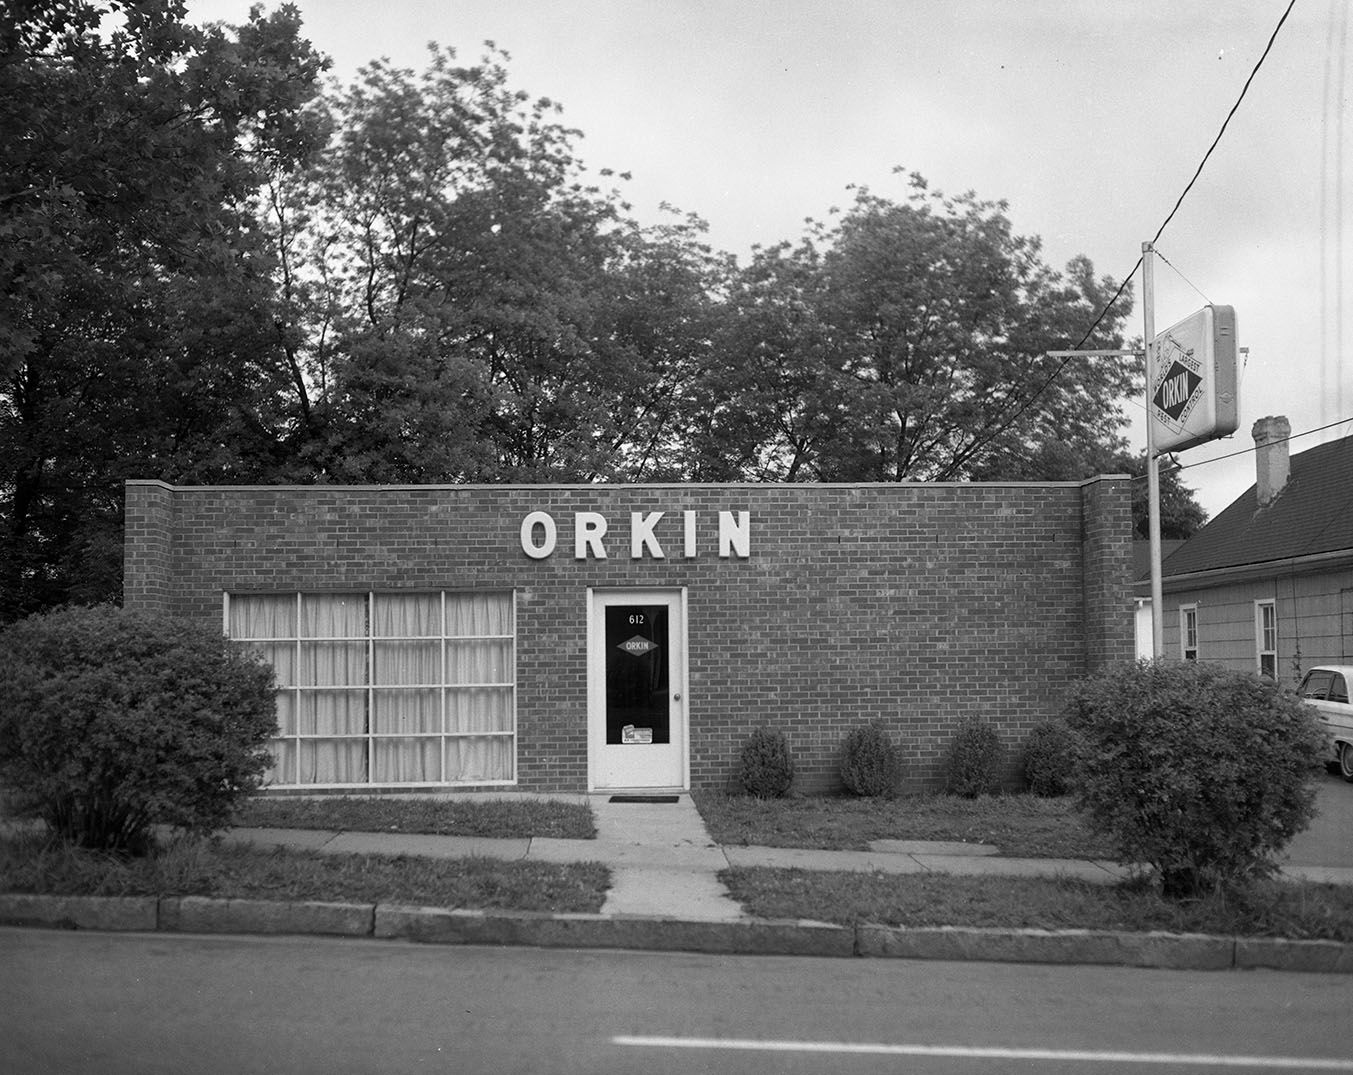 Orkin outlet in Raleigh, North Carolina, late 1950s